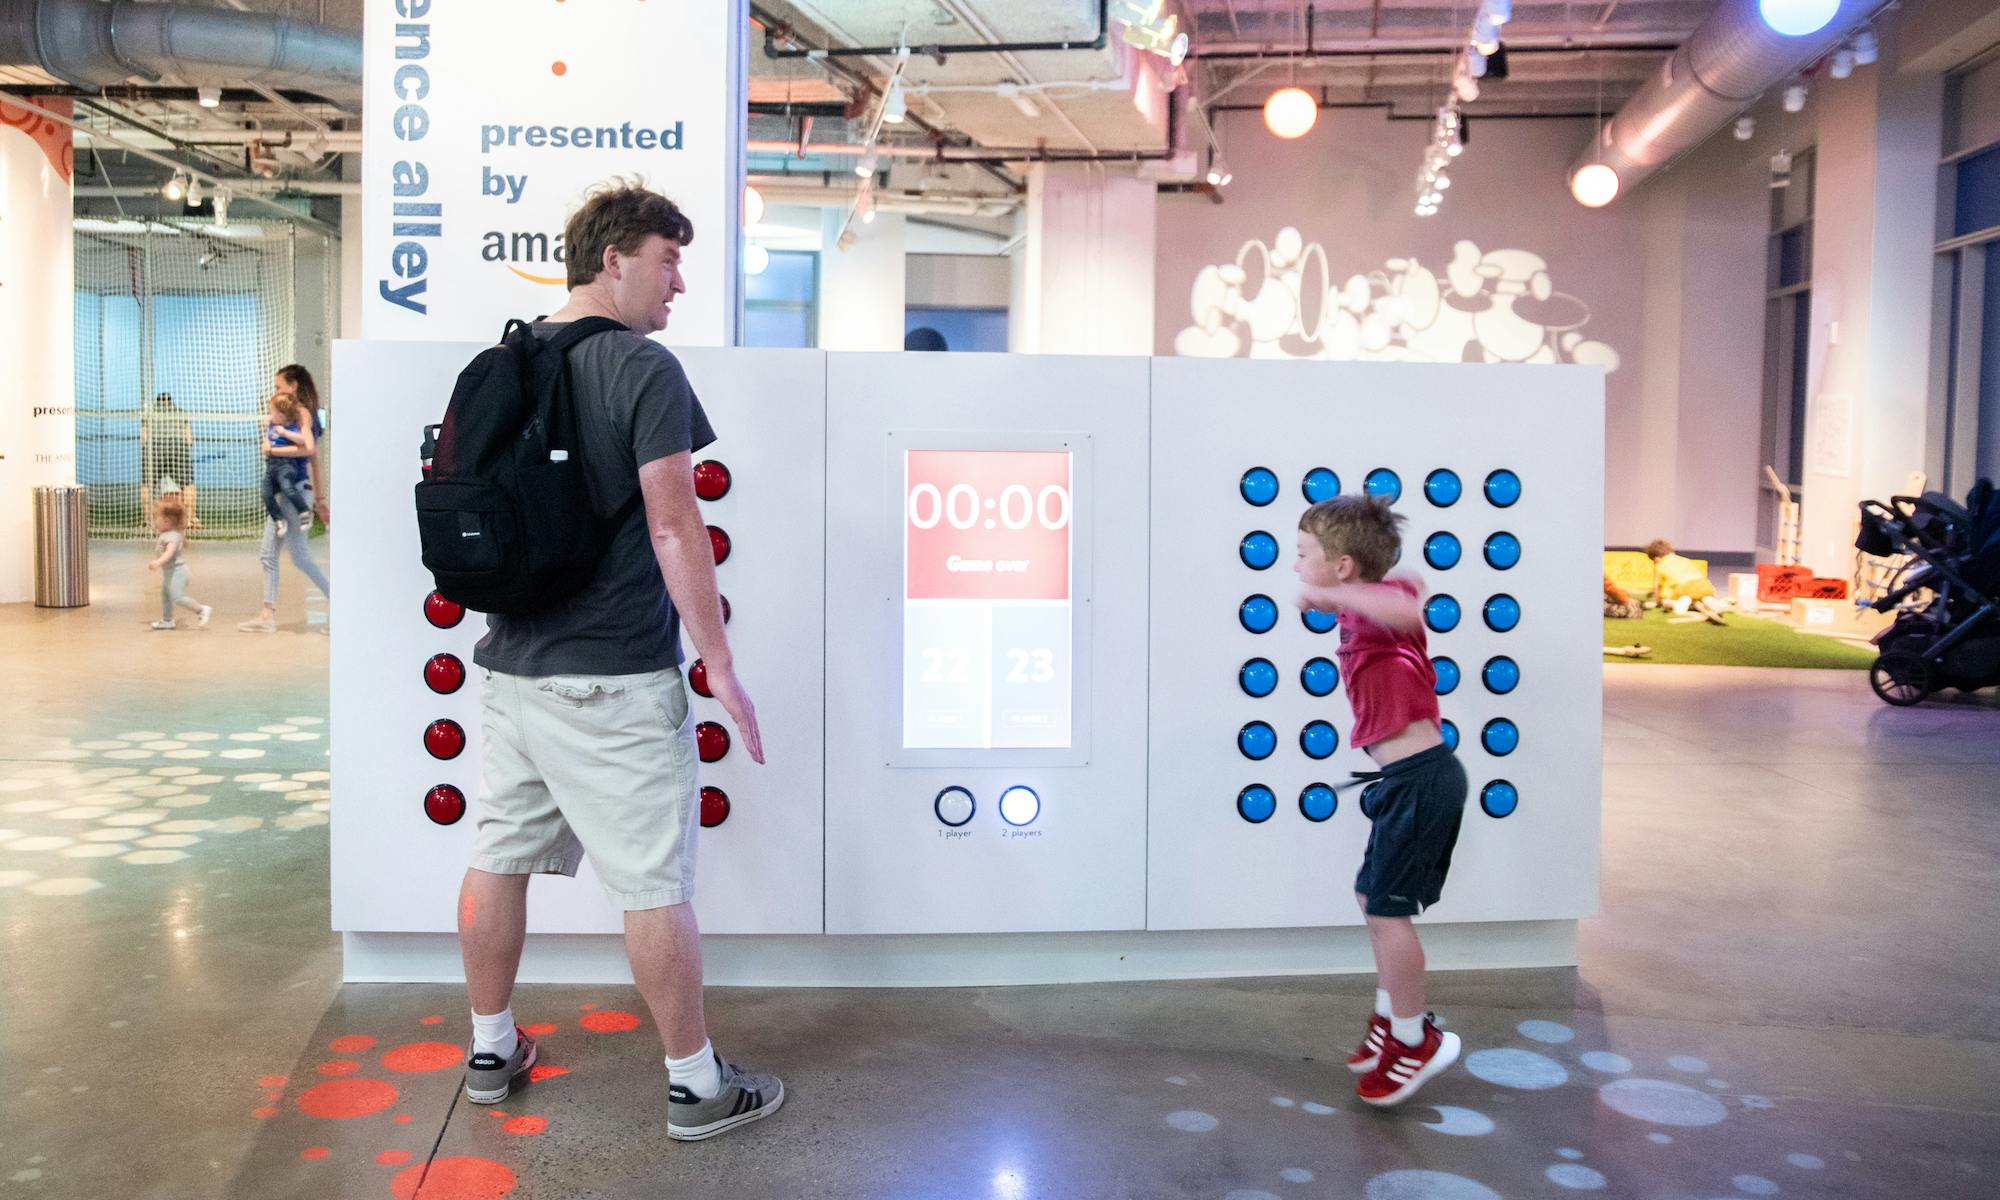 Father and son at the React experience in the Data Science Alley exhibit